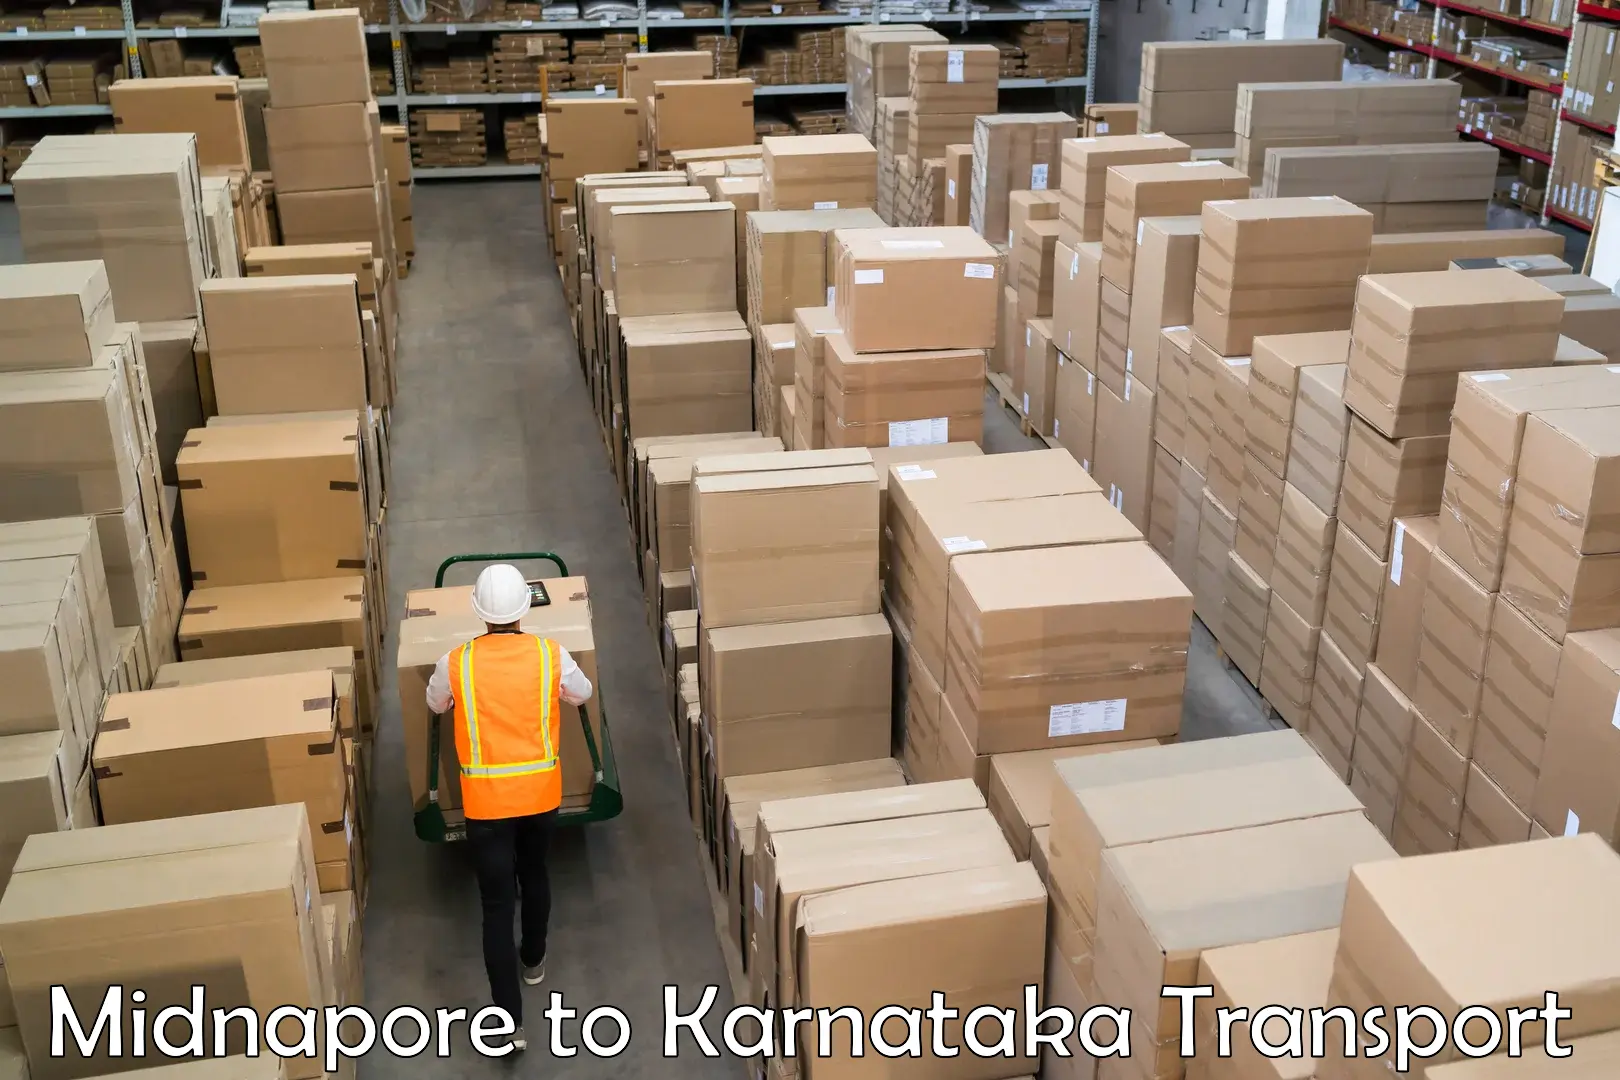 Daily parcel service transport Midnapore to Siruguppa